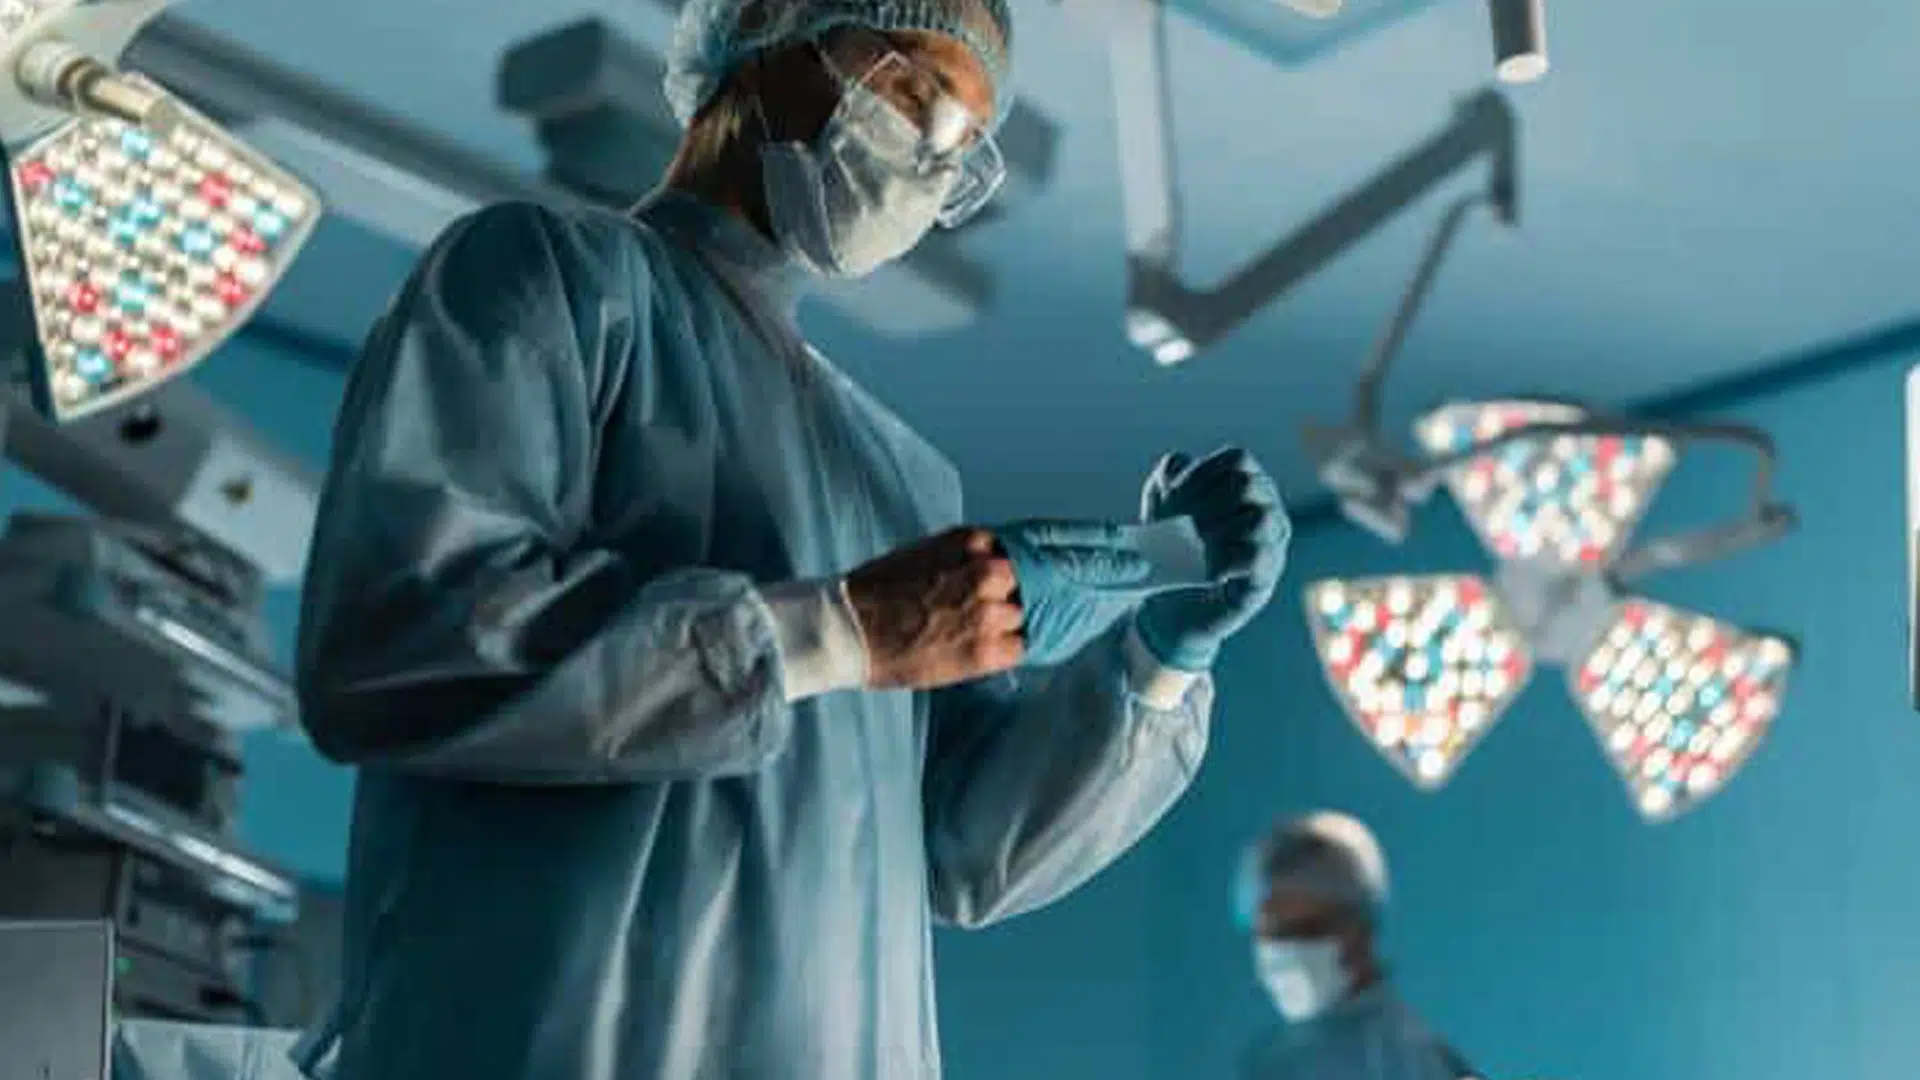 Surgeon potentially after committing medical malpractice